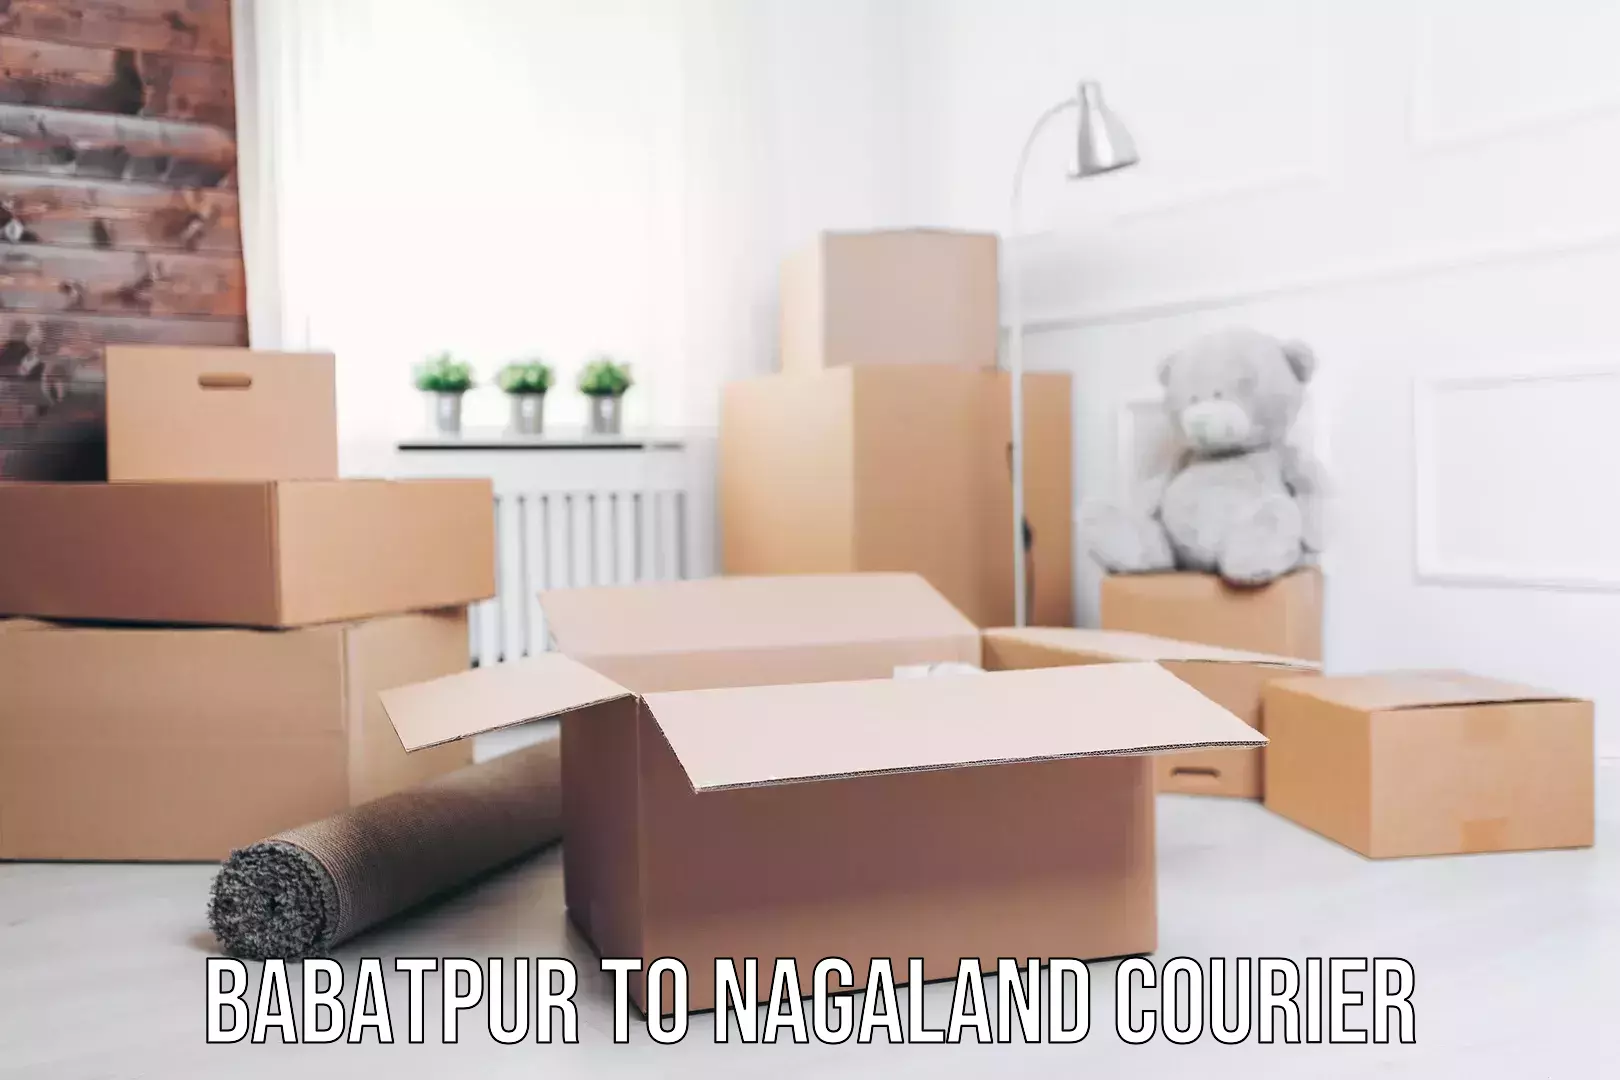 Reliable delivery network Babatpur to Nagaland